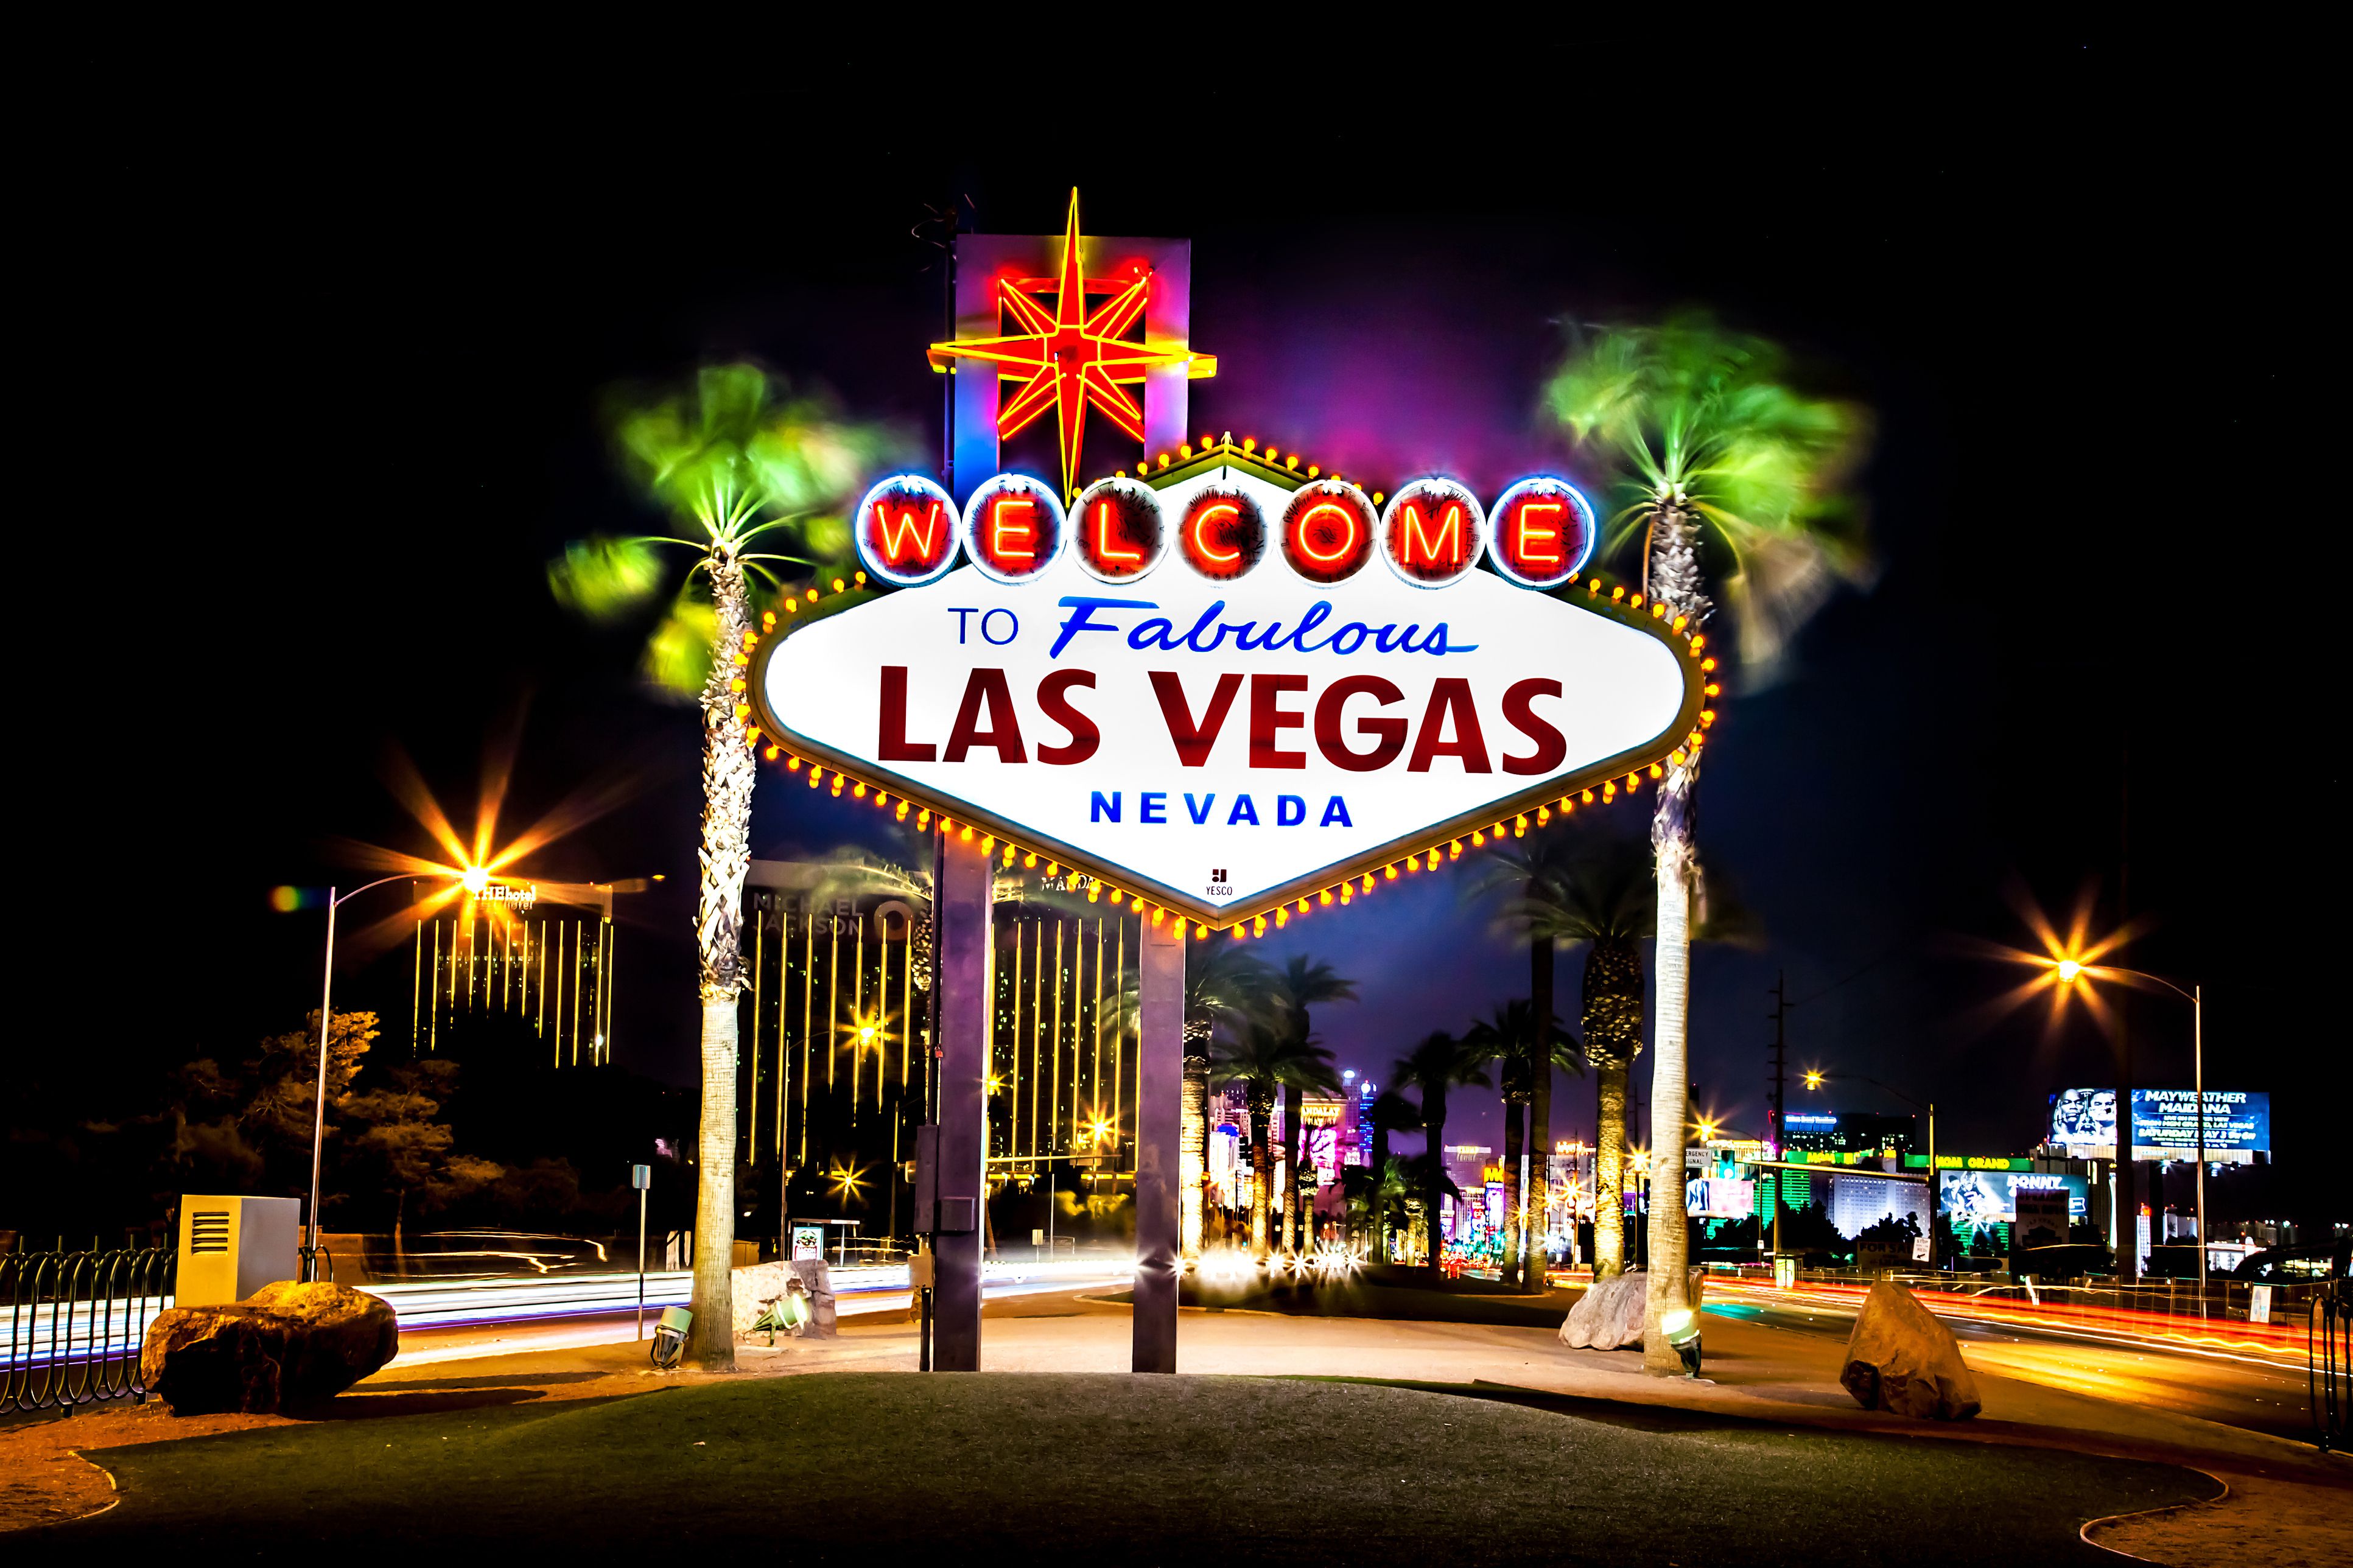 7 Ways to Have a Bad Time in Las Vegas